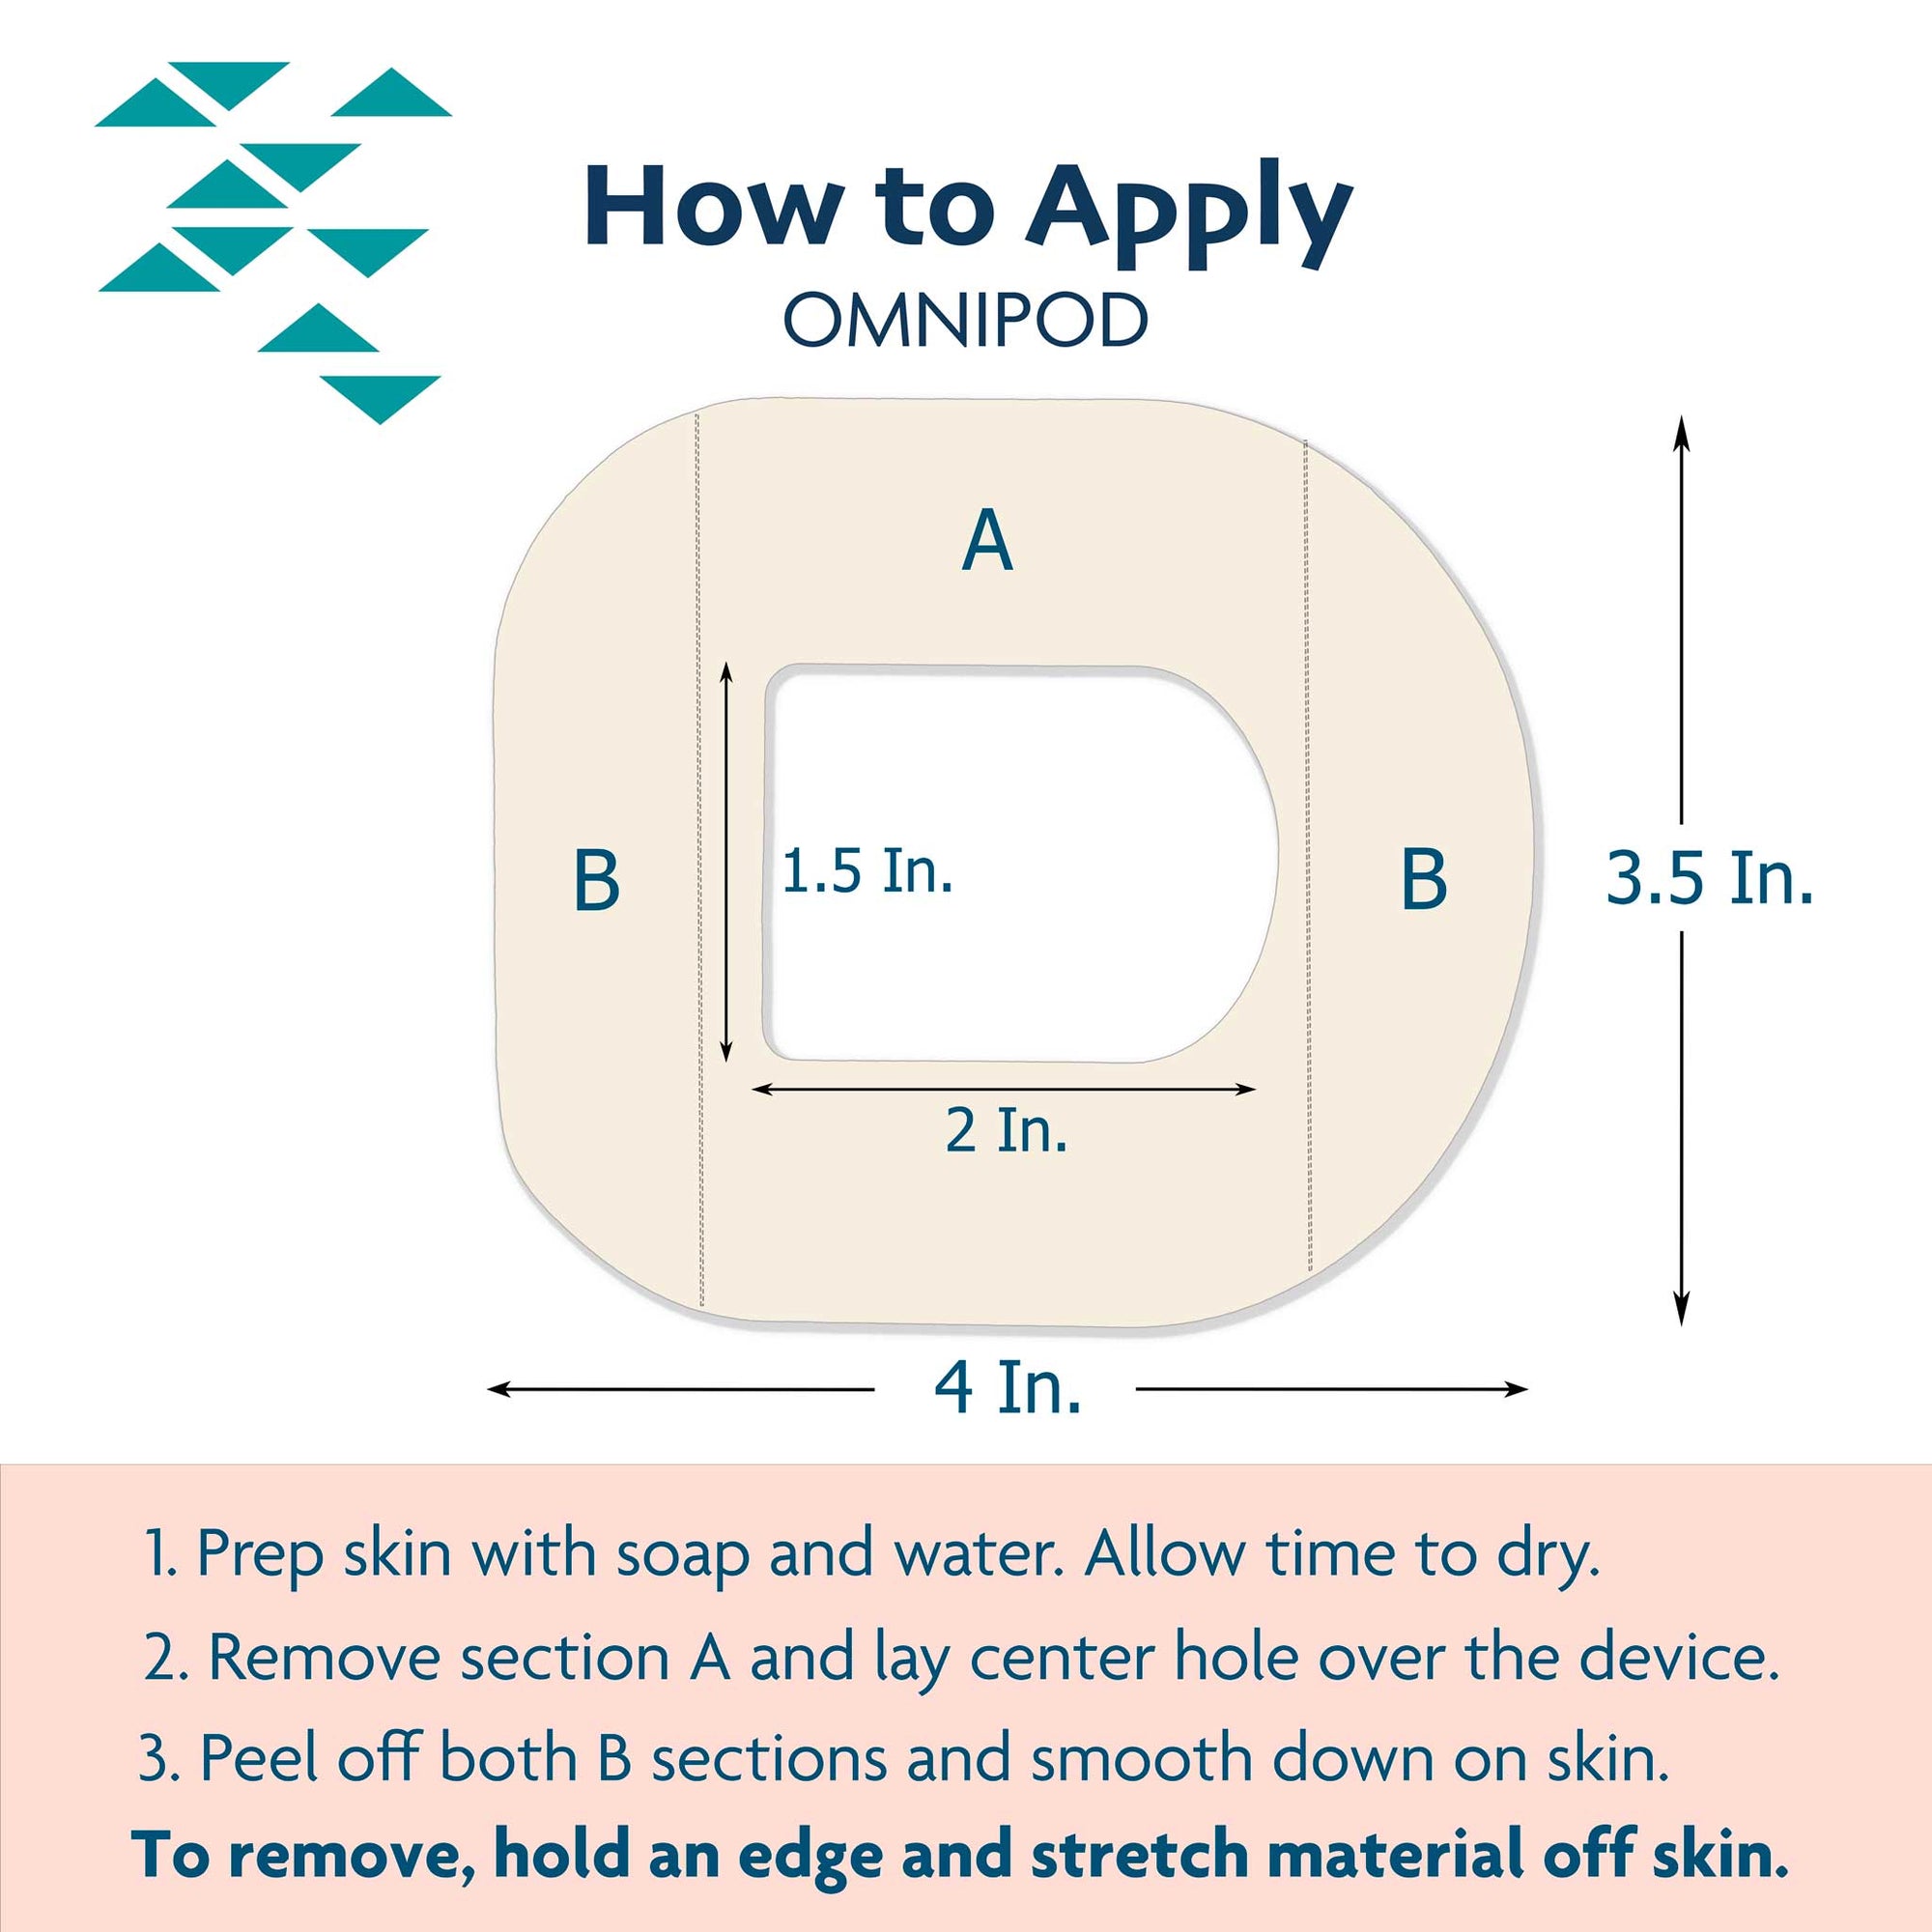 ExpressionMed Guide for proper use of Omnipod pump adhesive stickers